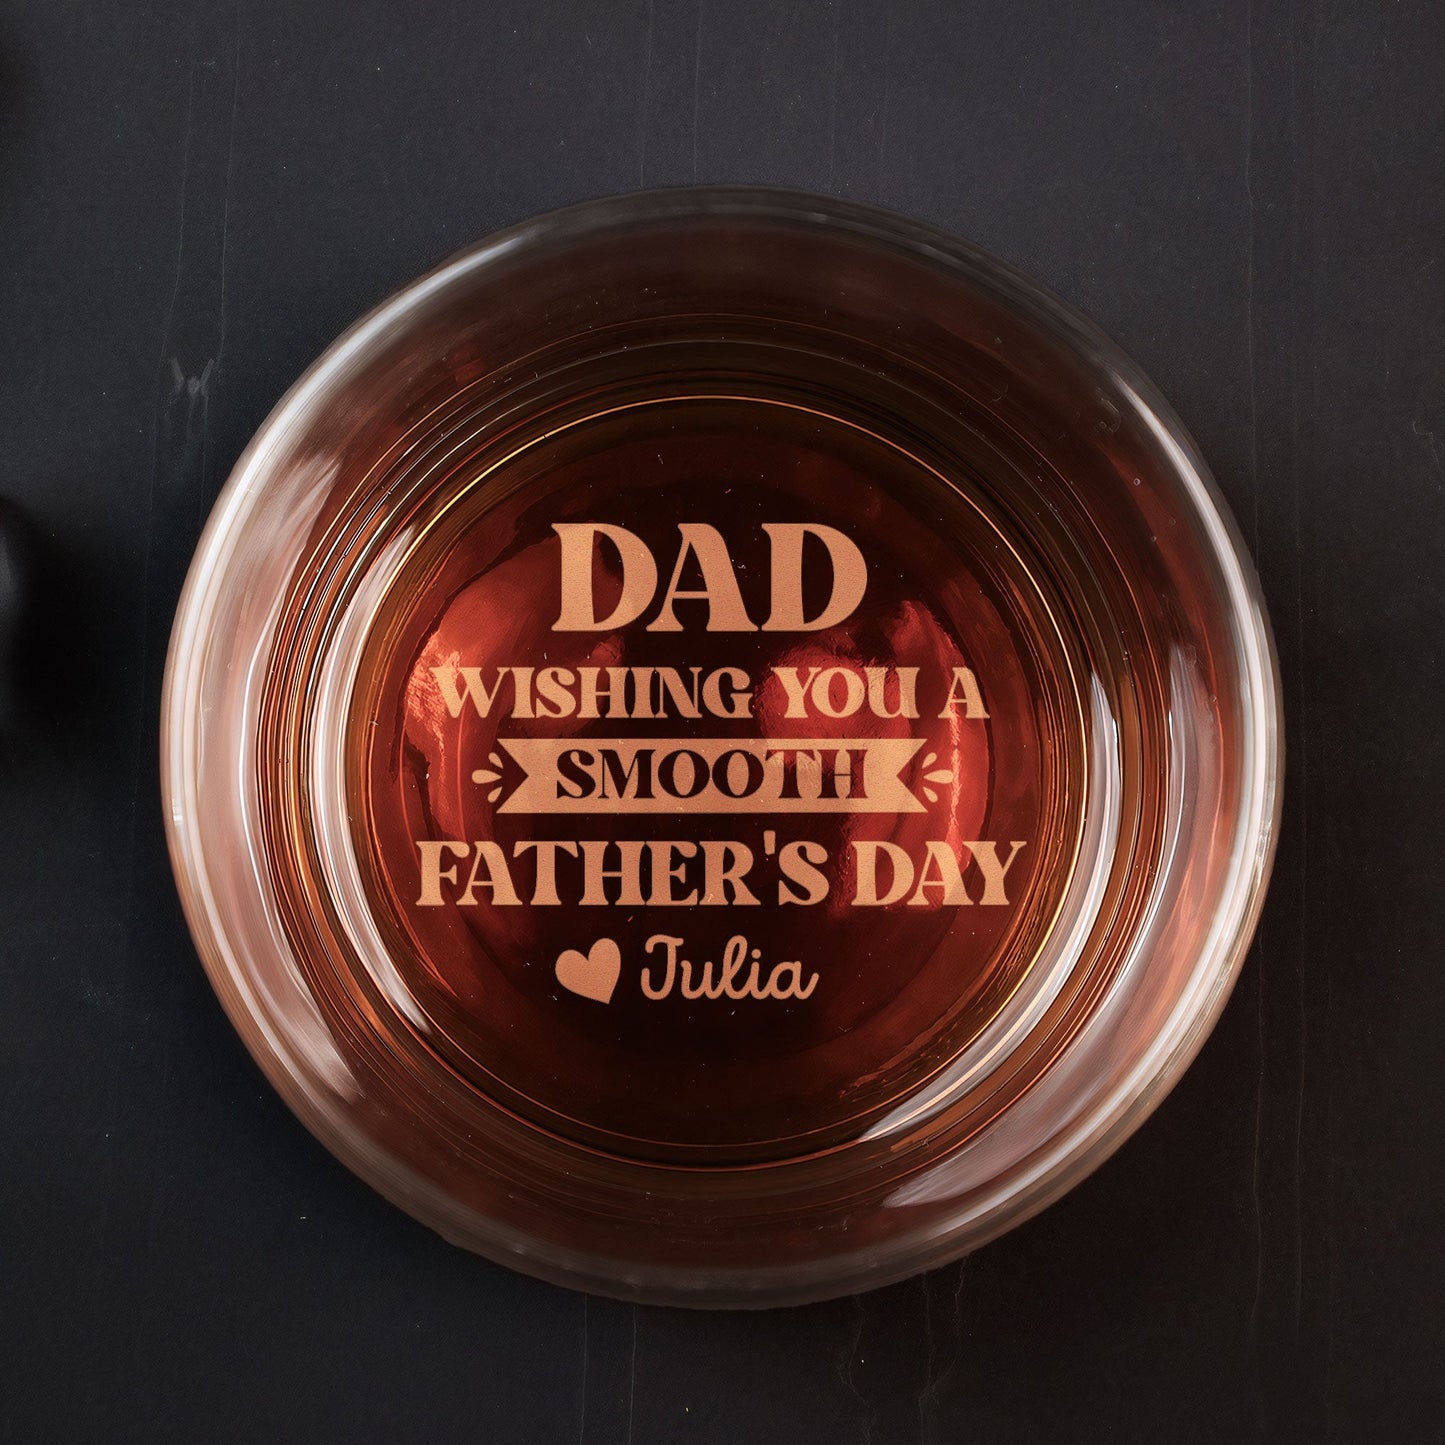 Wishing You A Smooth Father's Day - Personalized Engraved Whiskey Glass